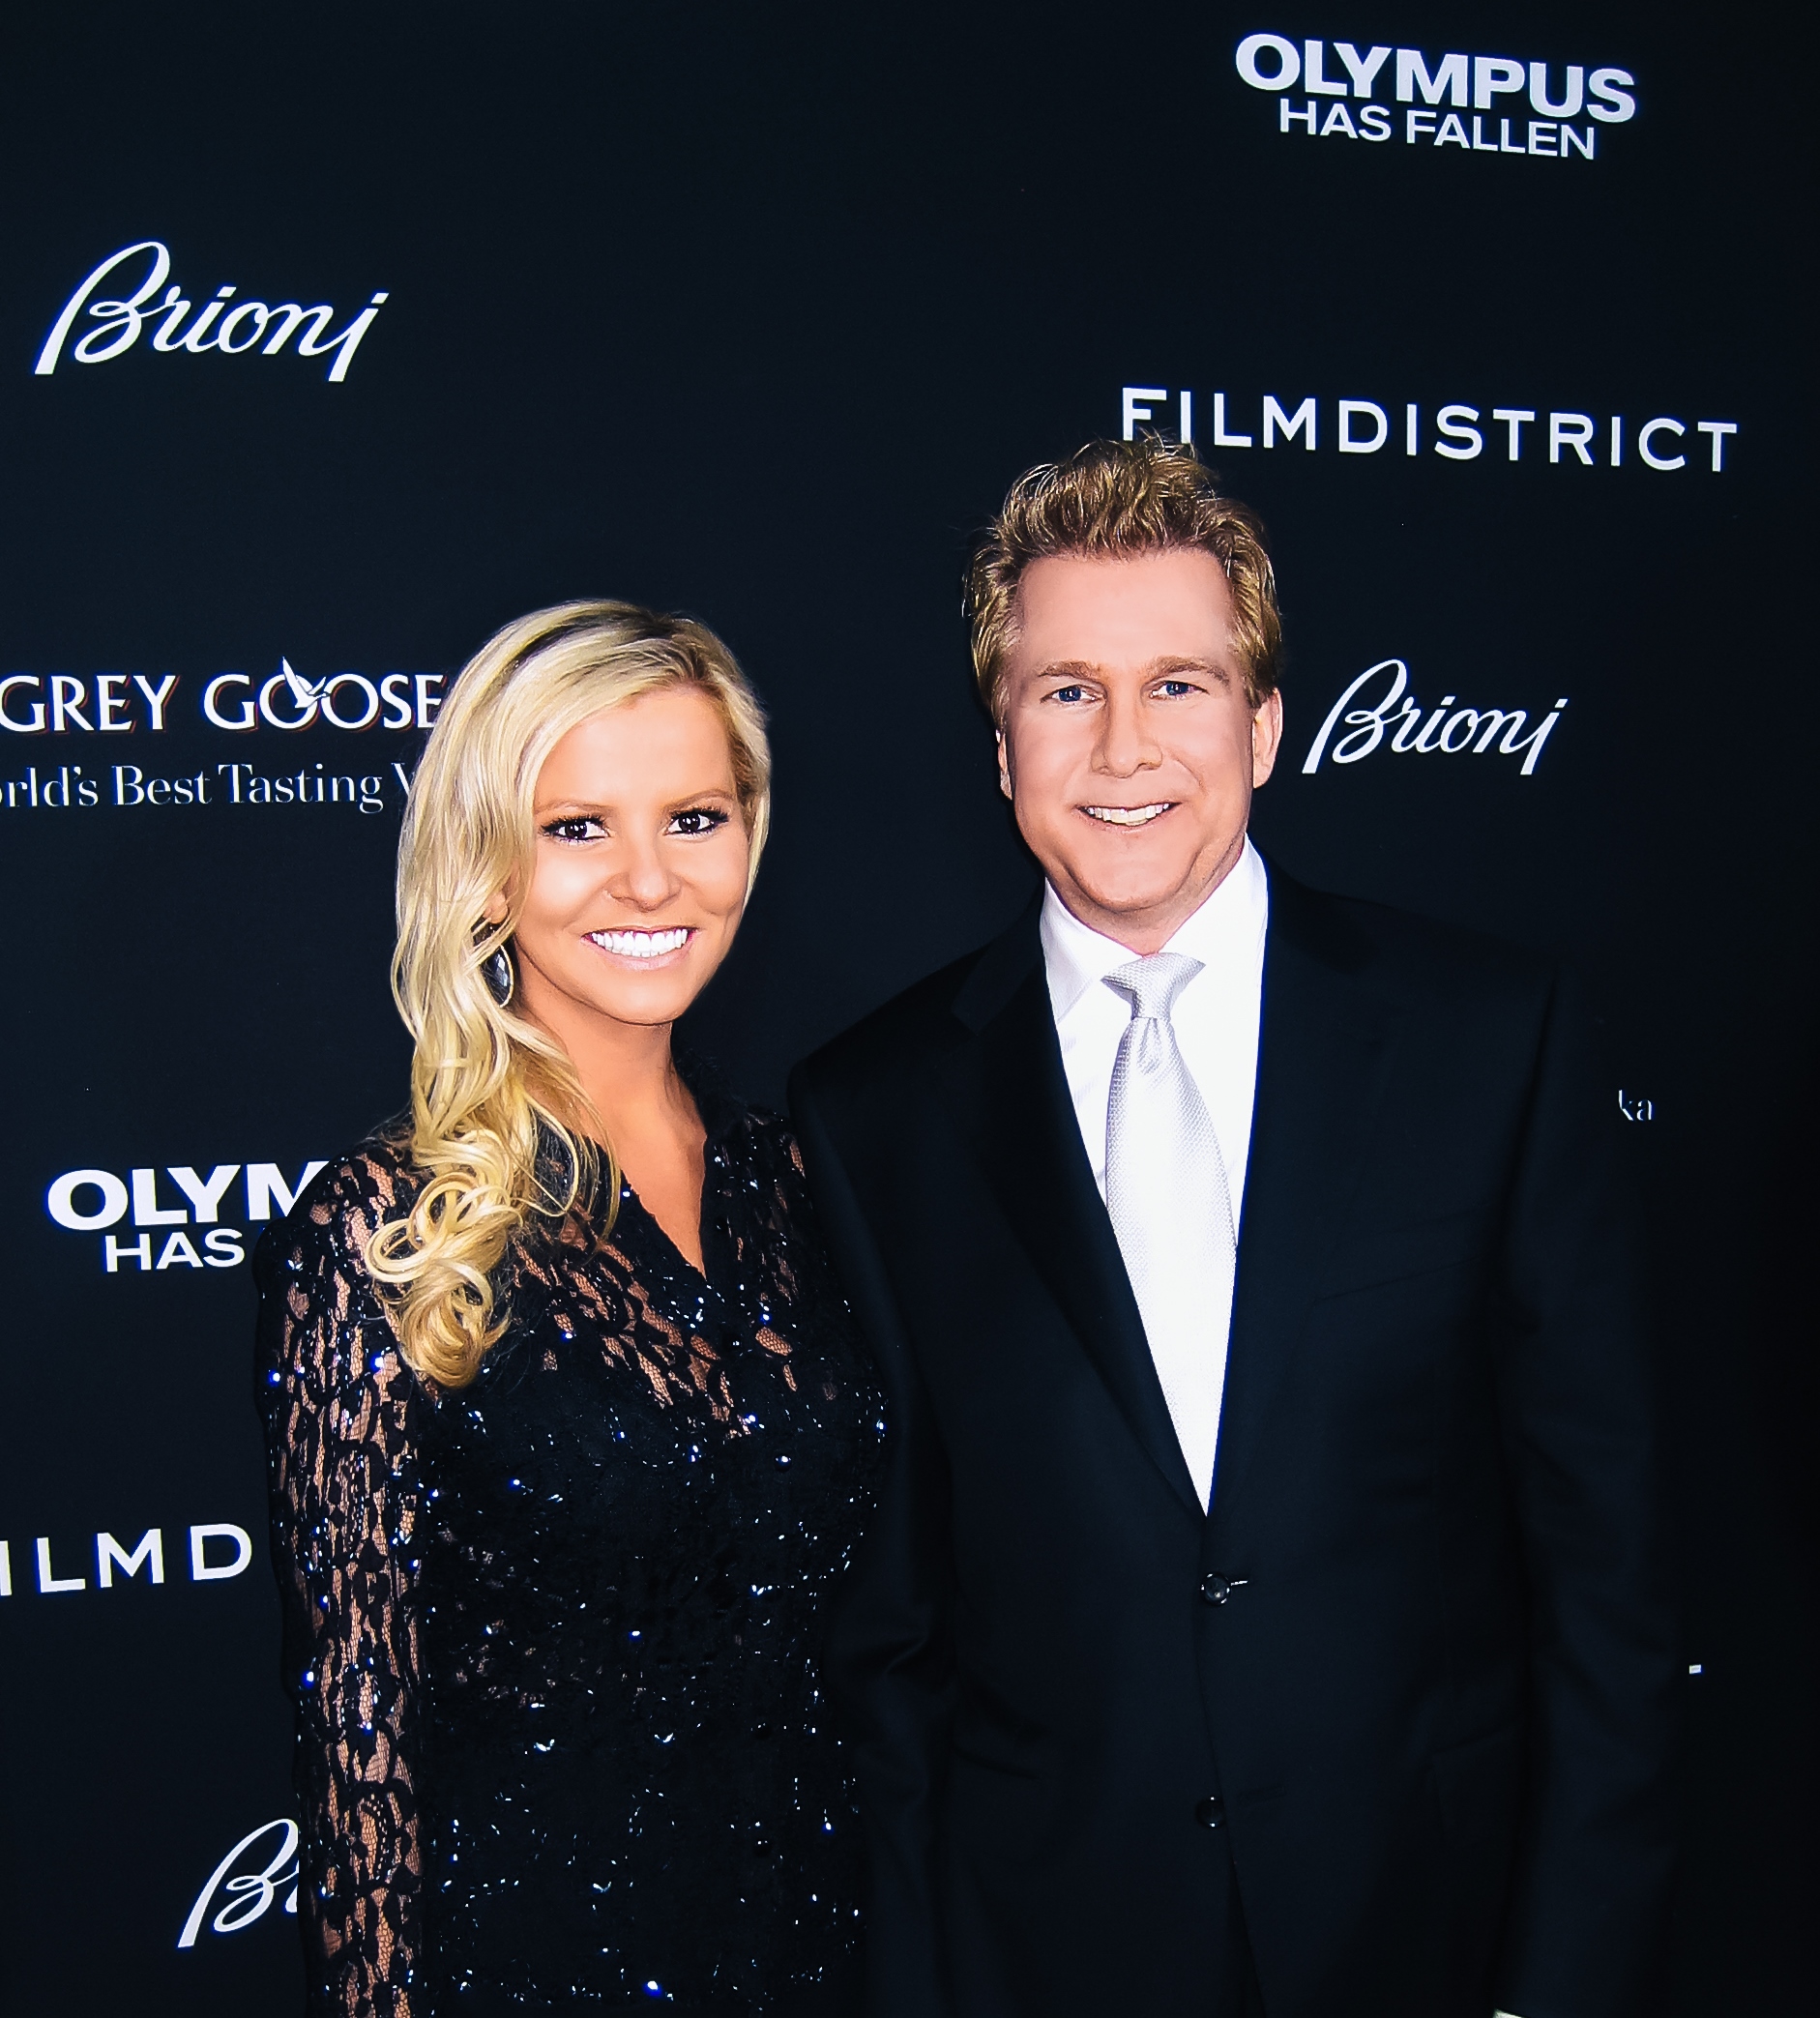 Katrin Benedikt and Creighton Rothenberger at the Olympus Has Fallen premiere - ArcLight Cinemas Cinerama Dome on March 18, 2013 in Hollywood, CA.